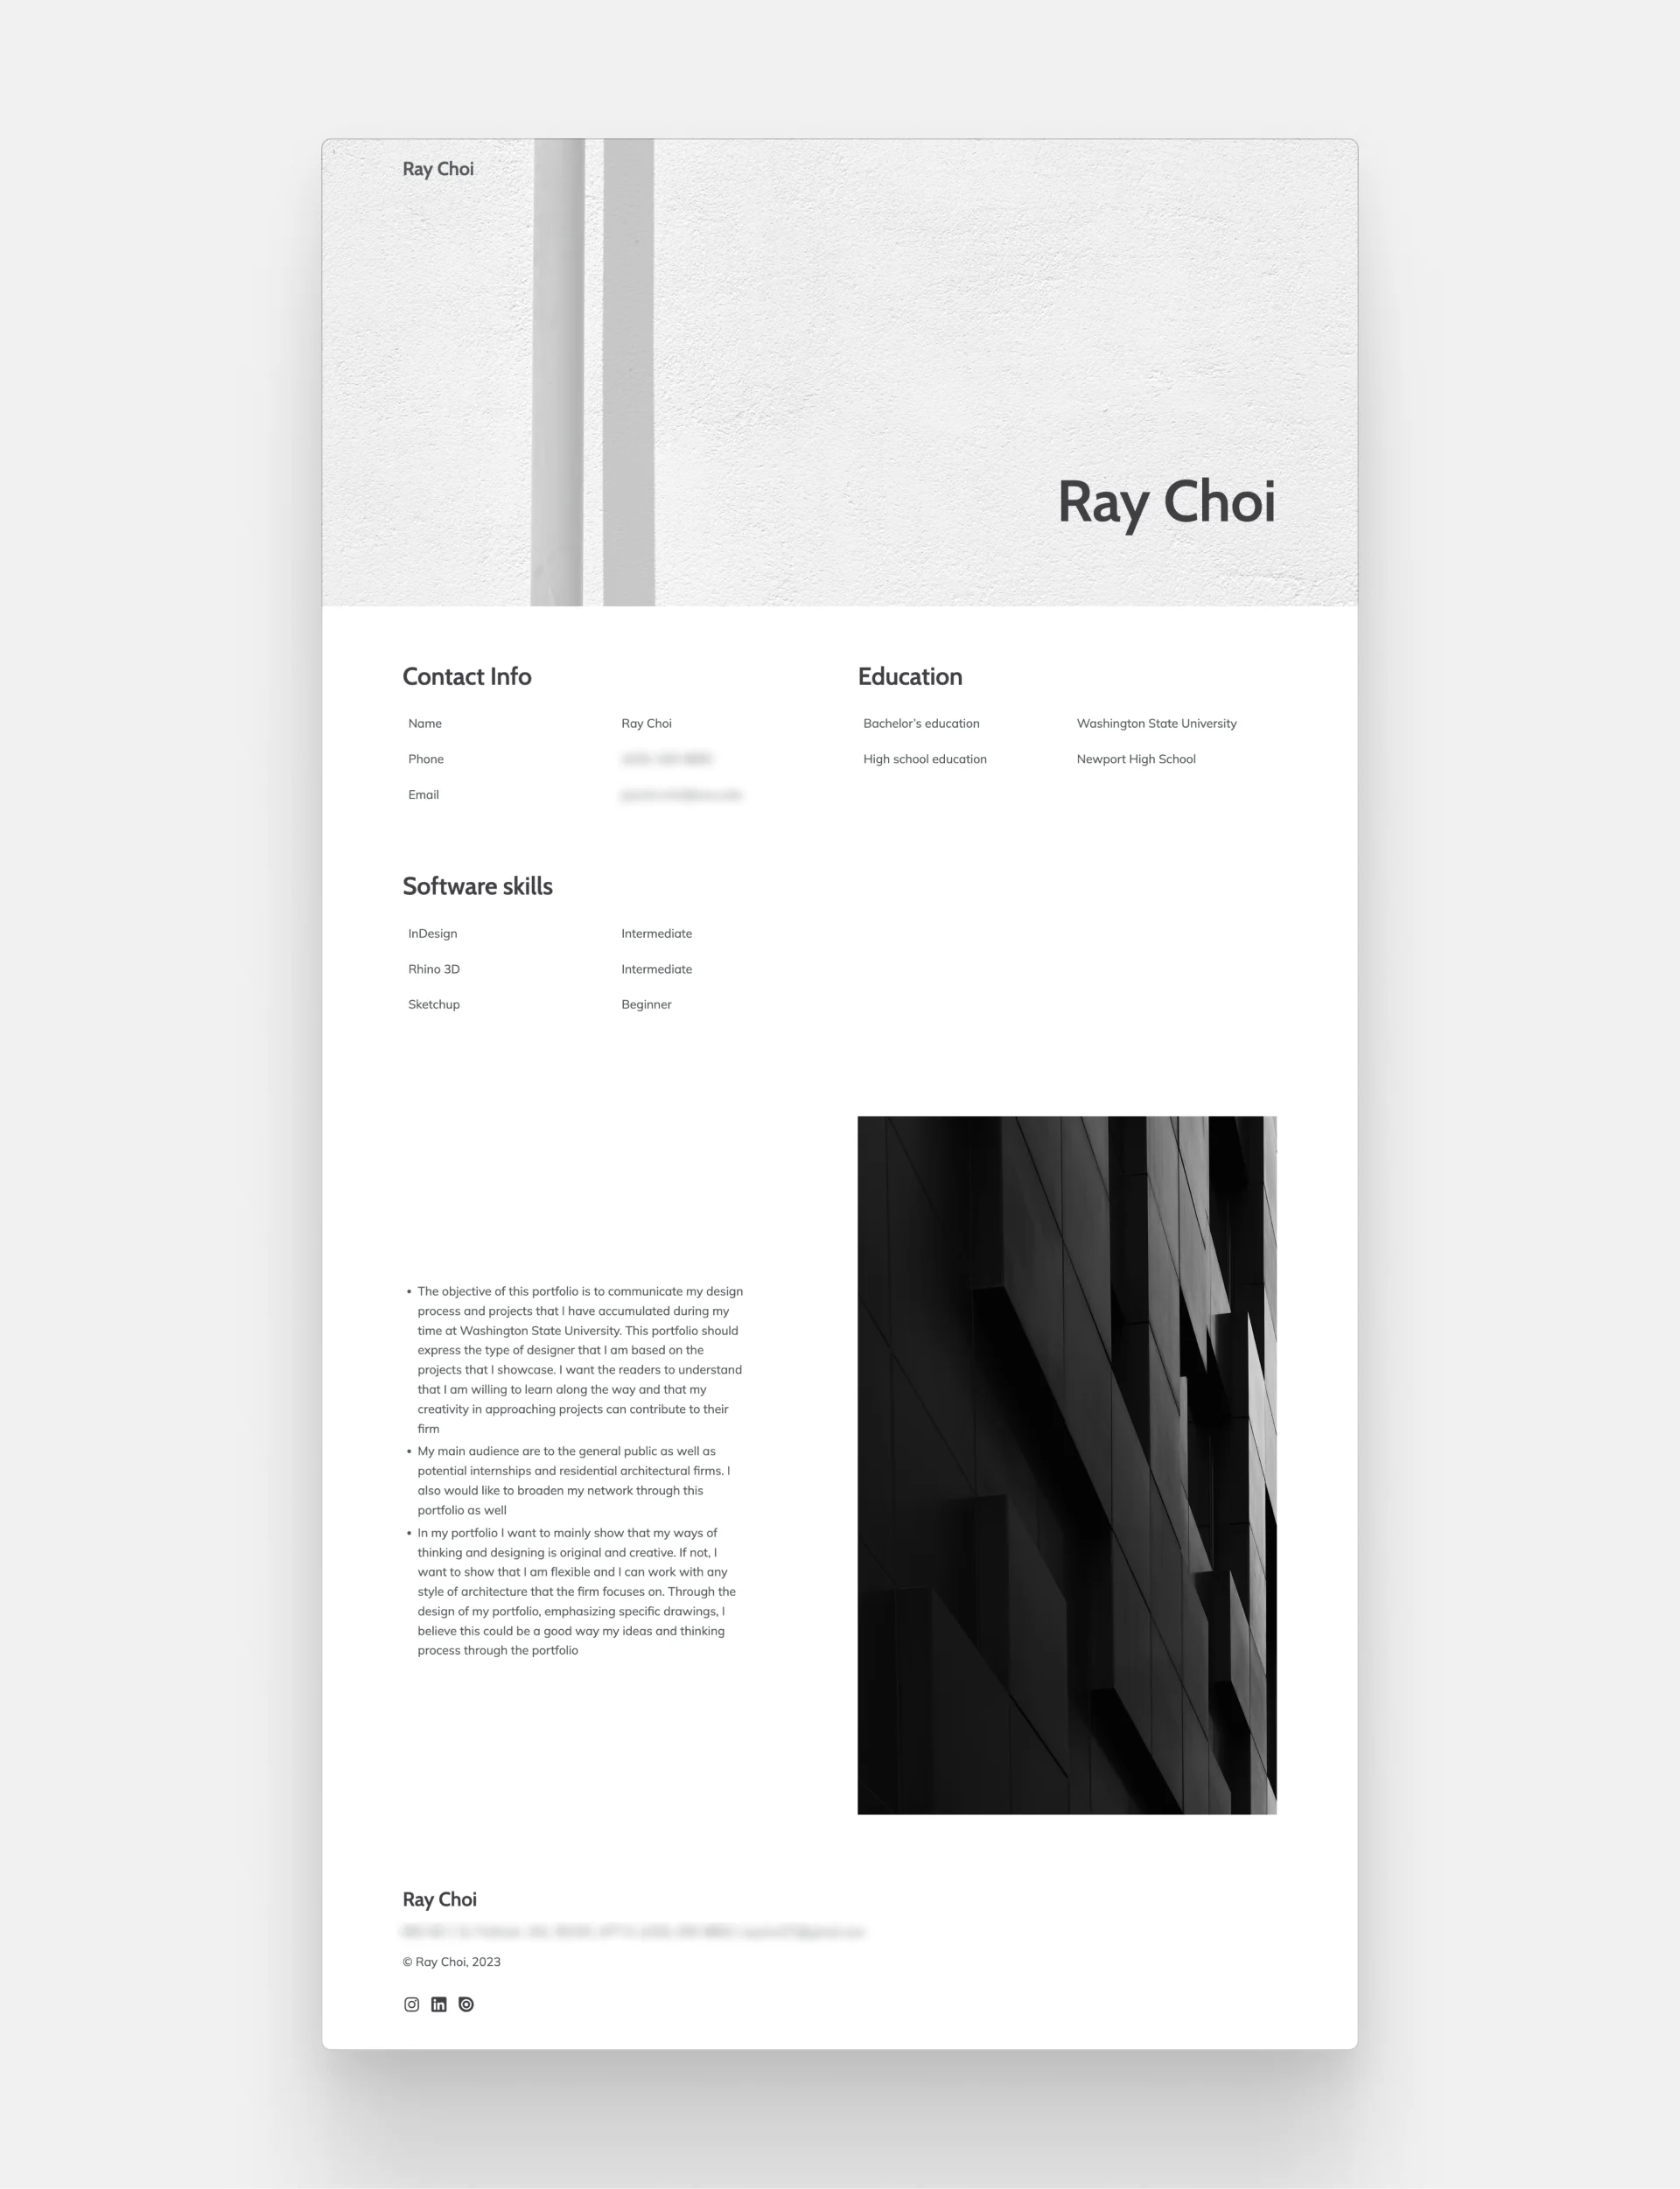 Work experience section of Ray Choi's resume. Hero image of a shadow in the beginning, simple and clean design in the rest of the resume